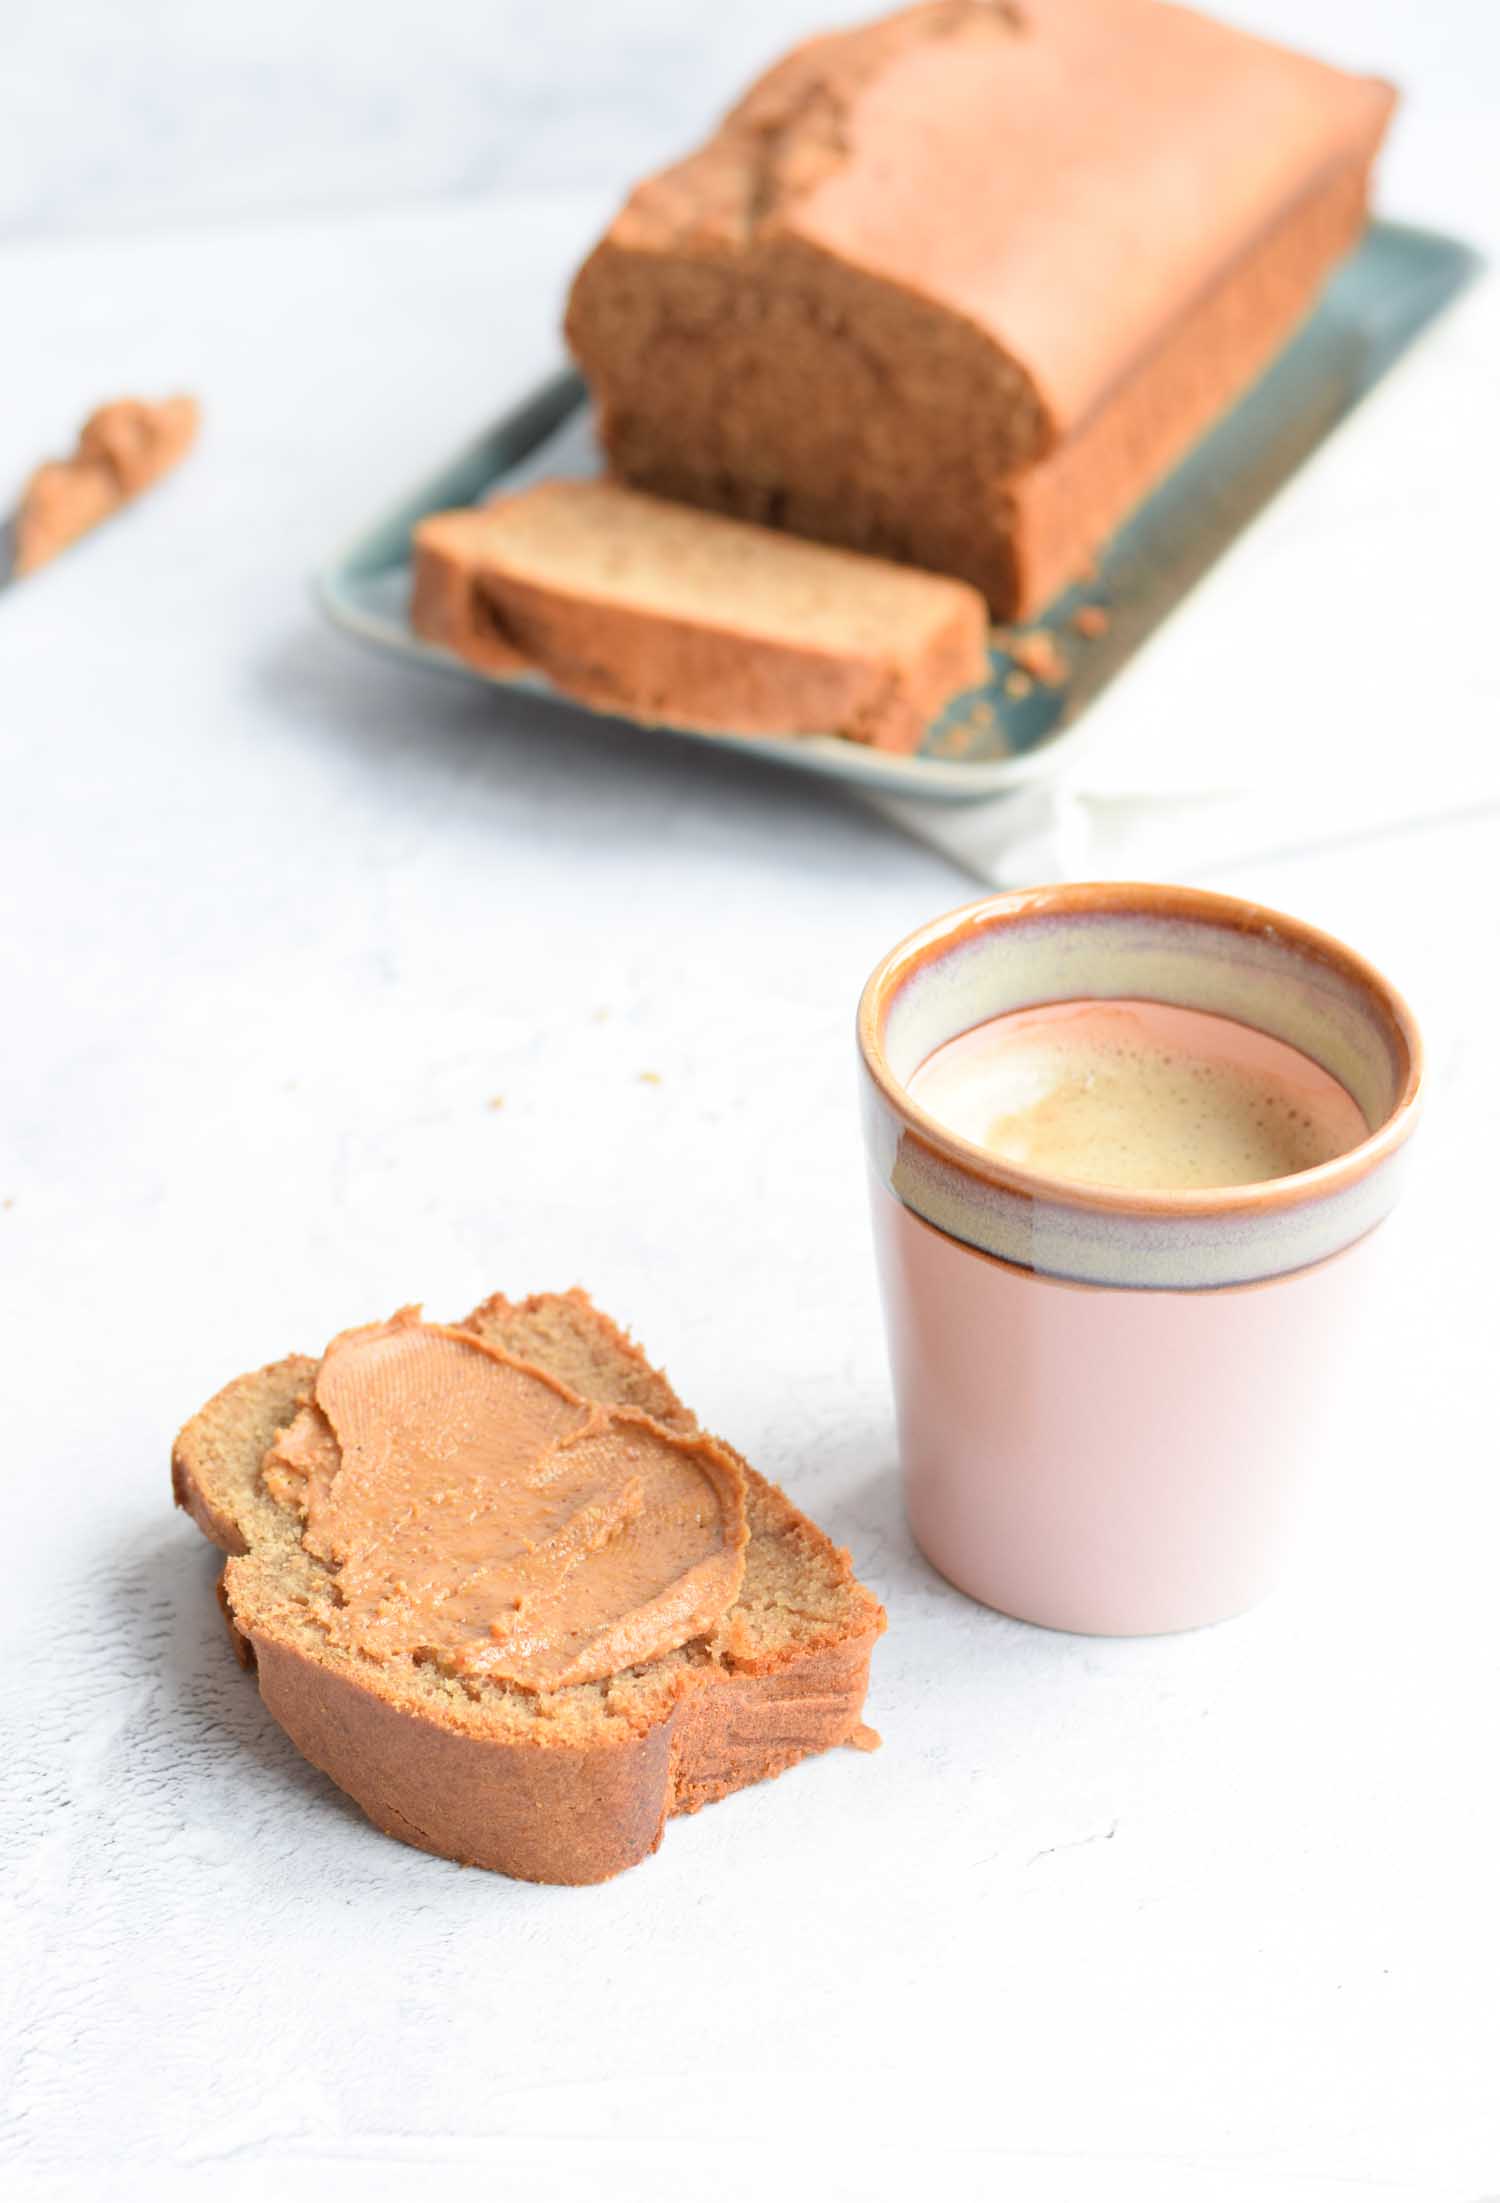 A slice of banana bread with a cup of coffee next to it